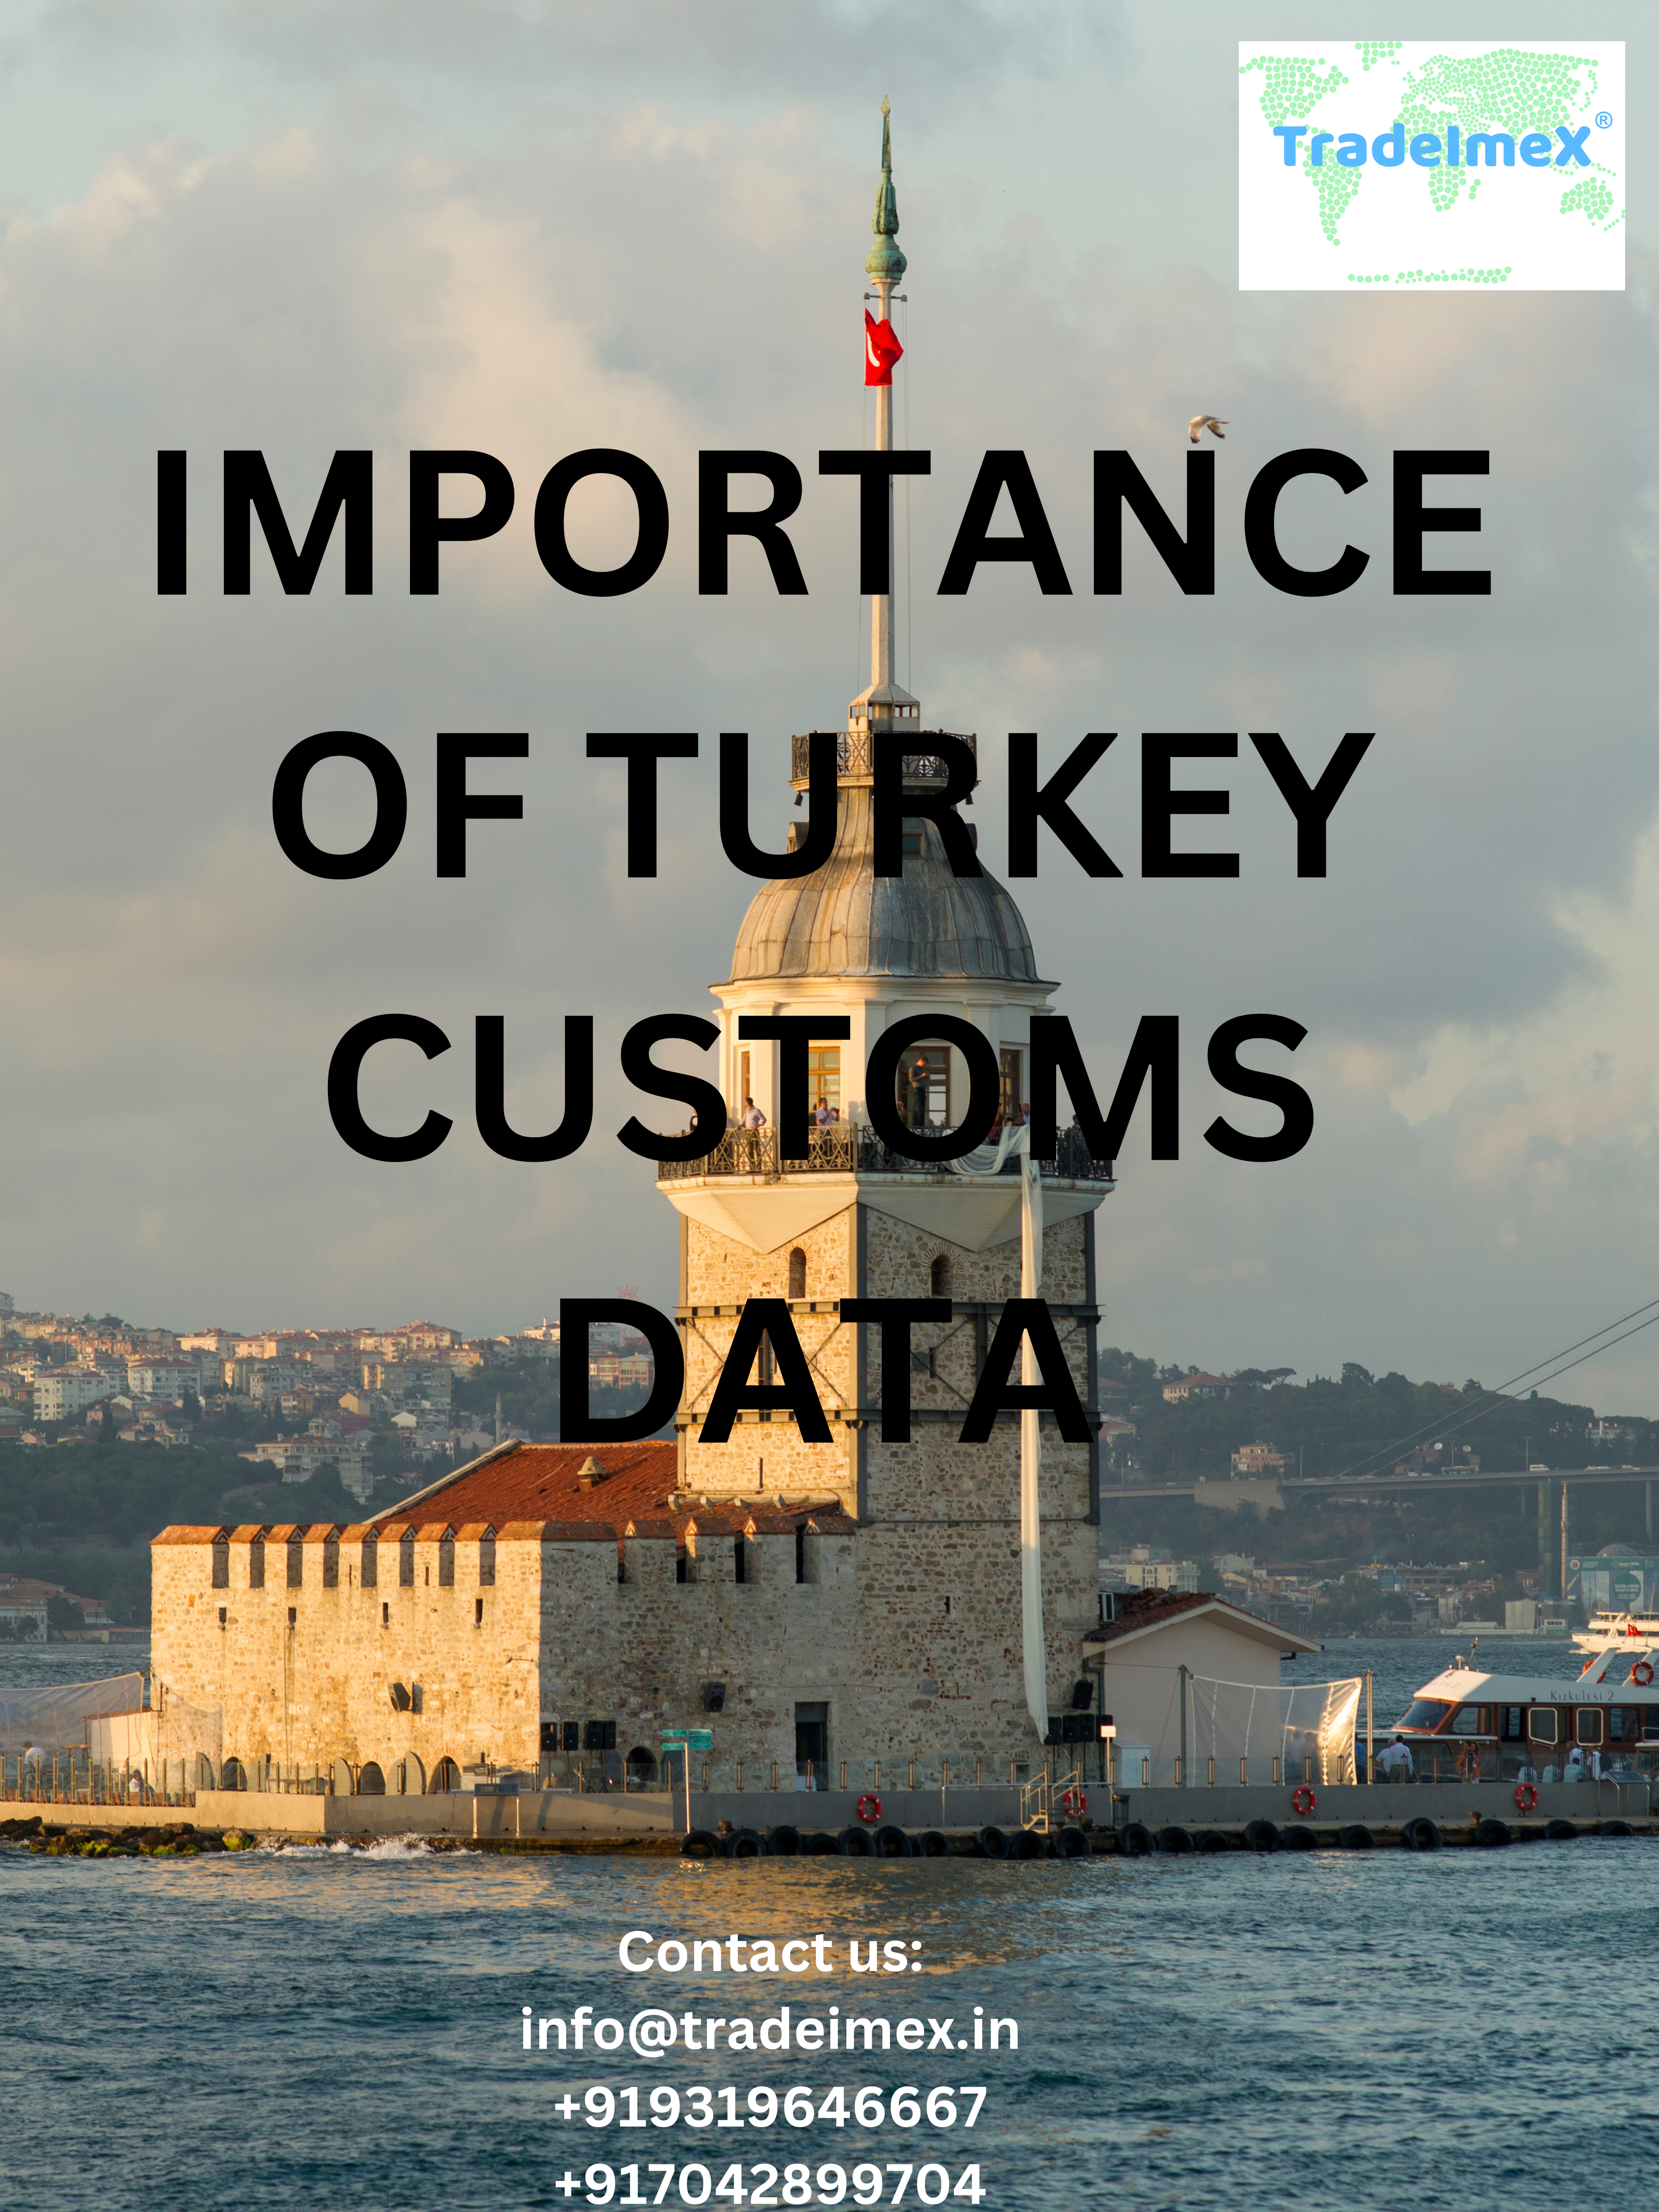 WHAT IS THE IMPORTANCE OF TURKEY CUSTOMS DATA? – Site Title